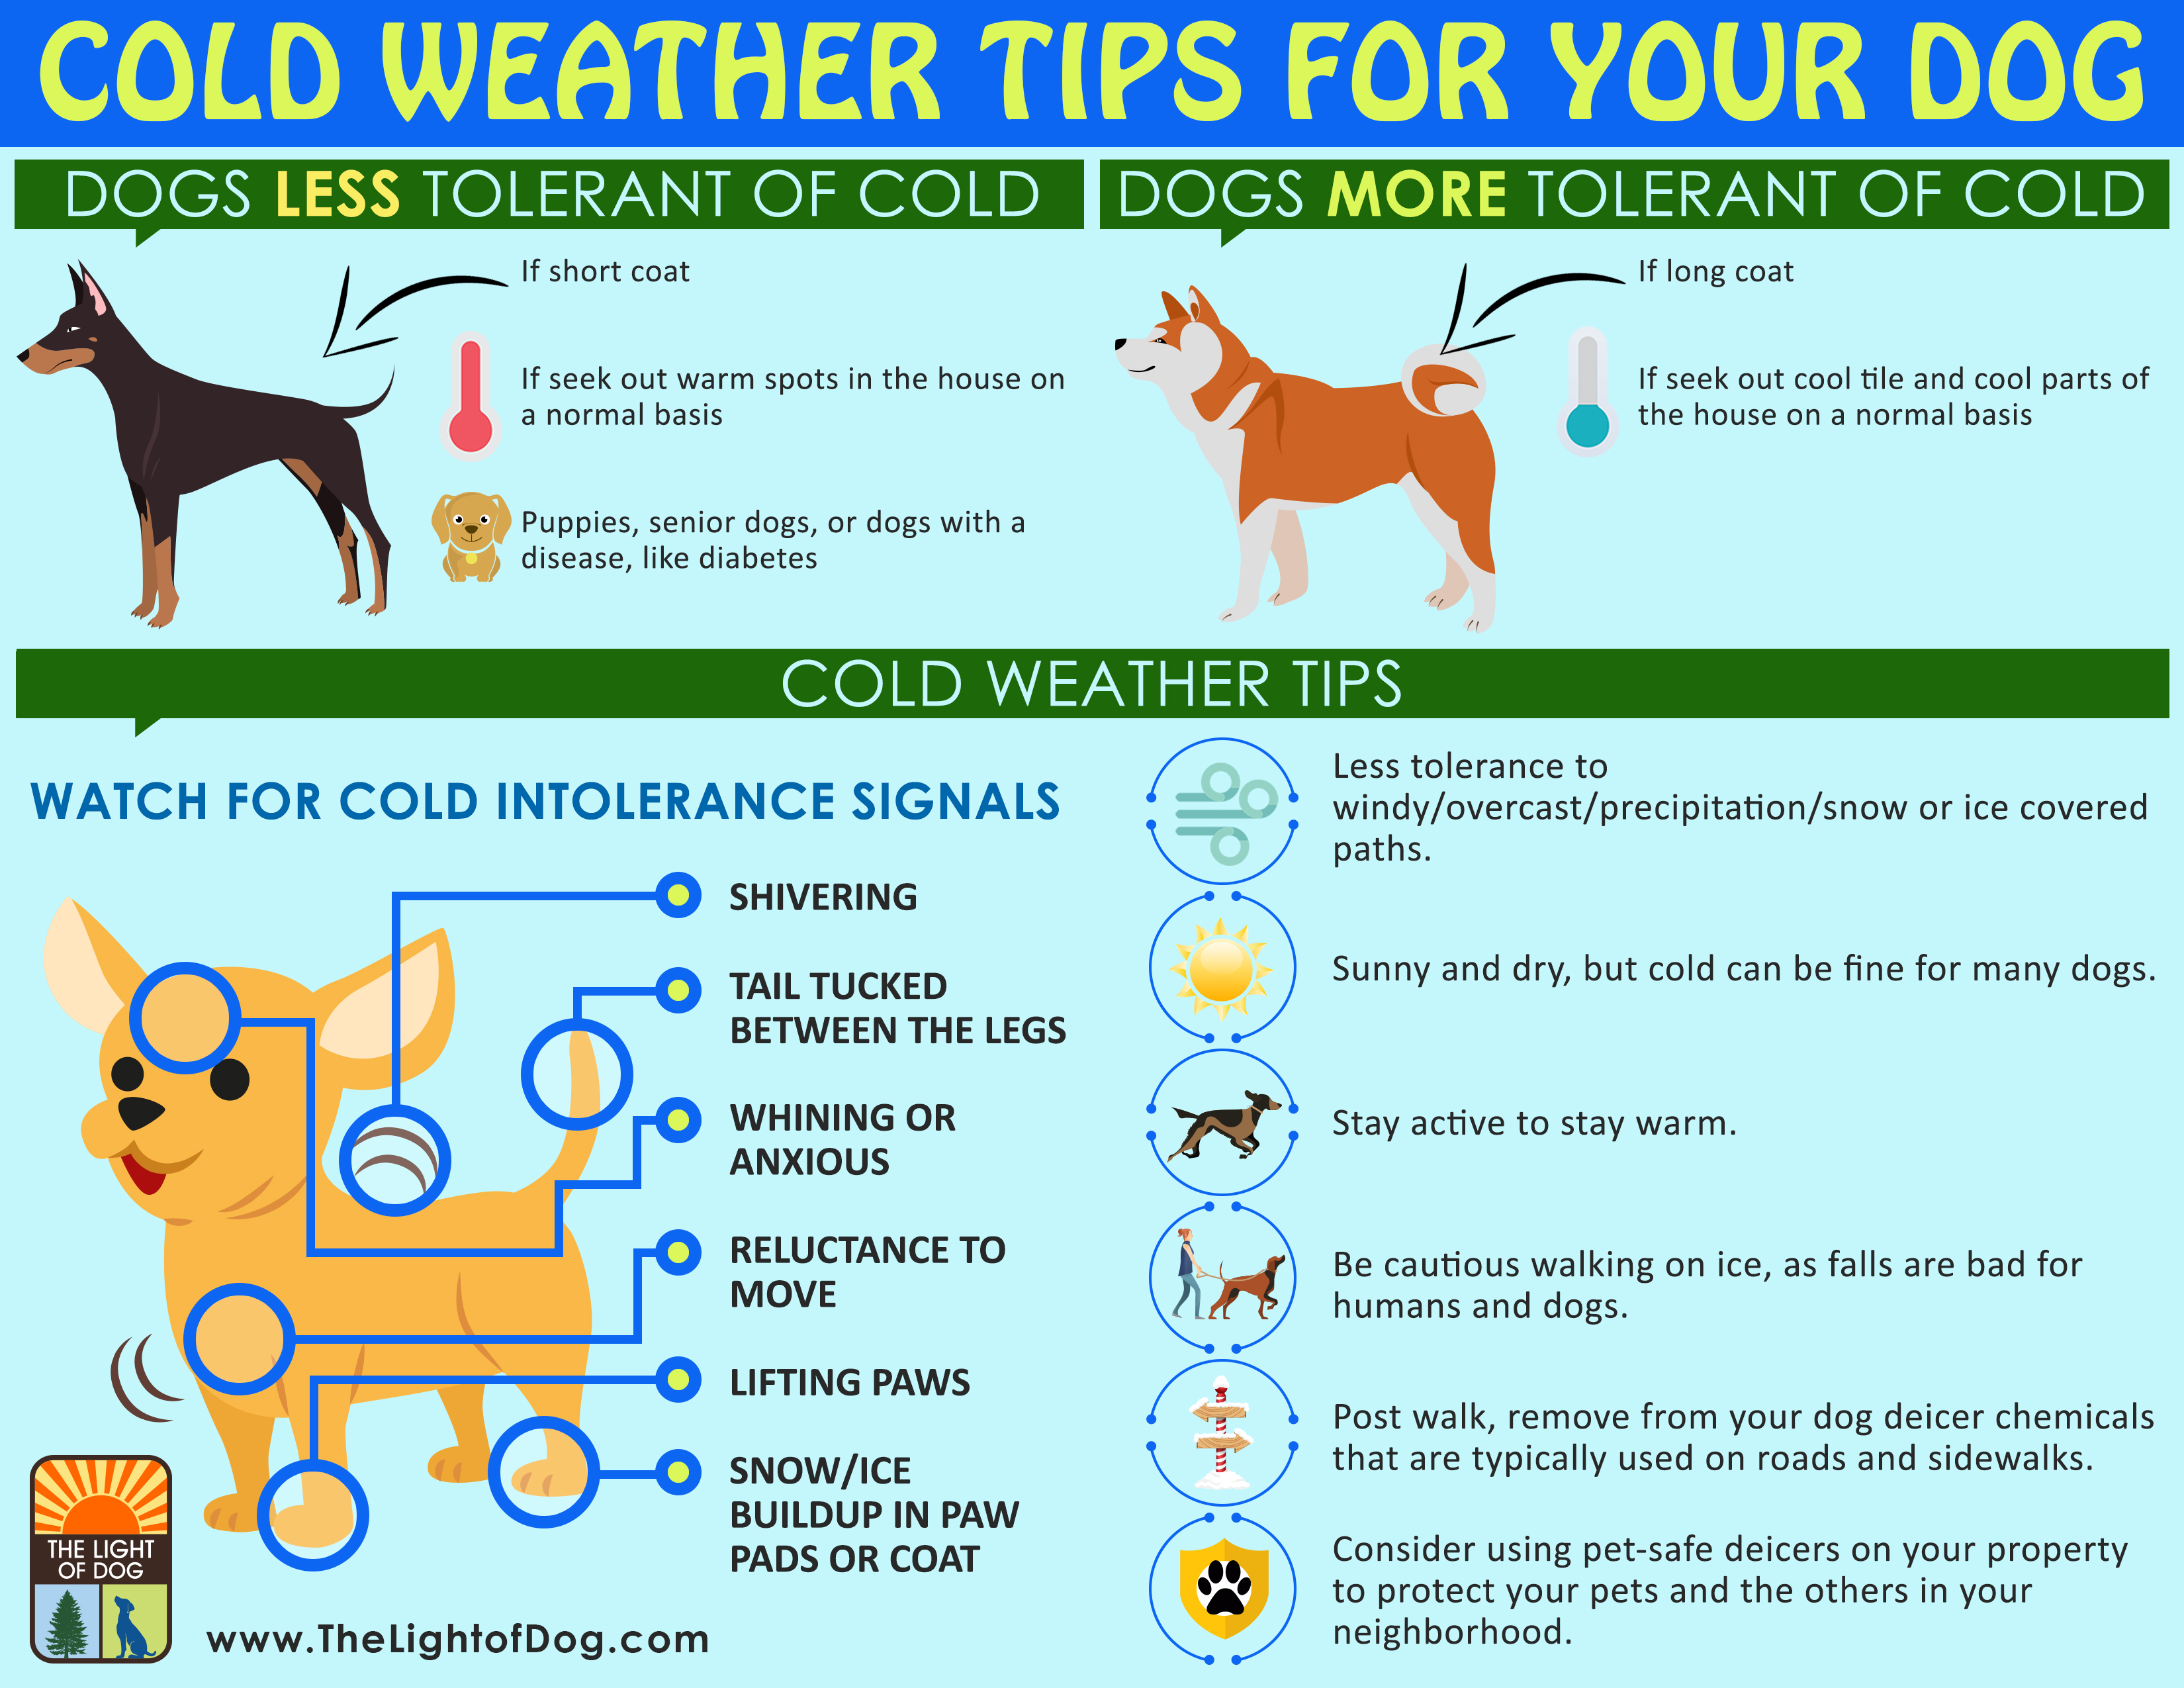 https://thelightofdog.com/wp-content/uploads/2017/02/Cold_weather_tips_for_your_dog.jpg